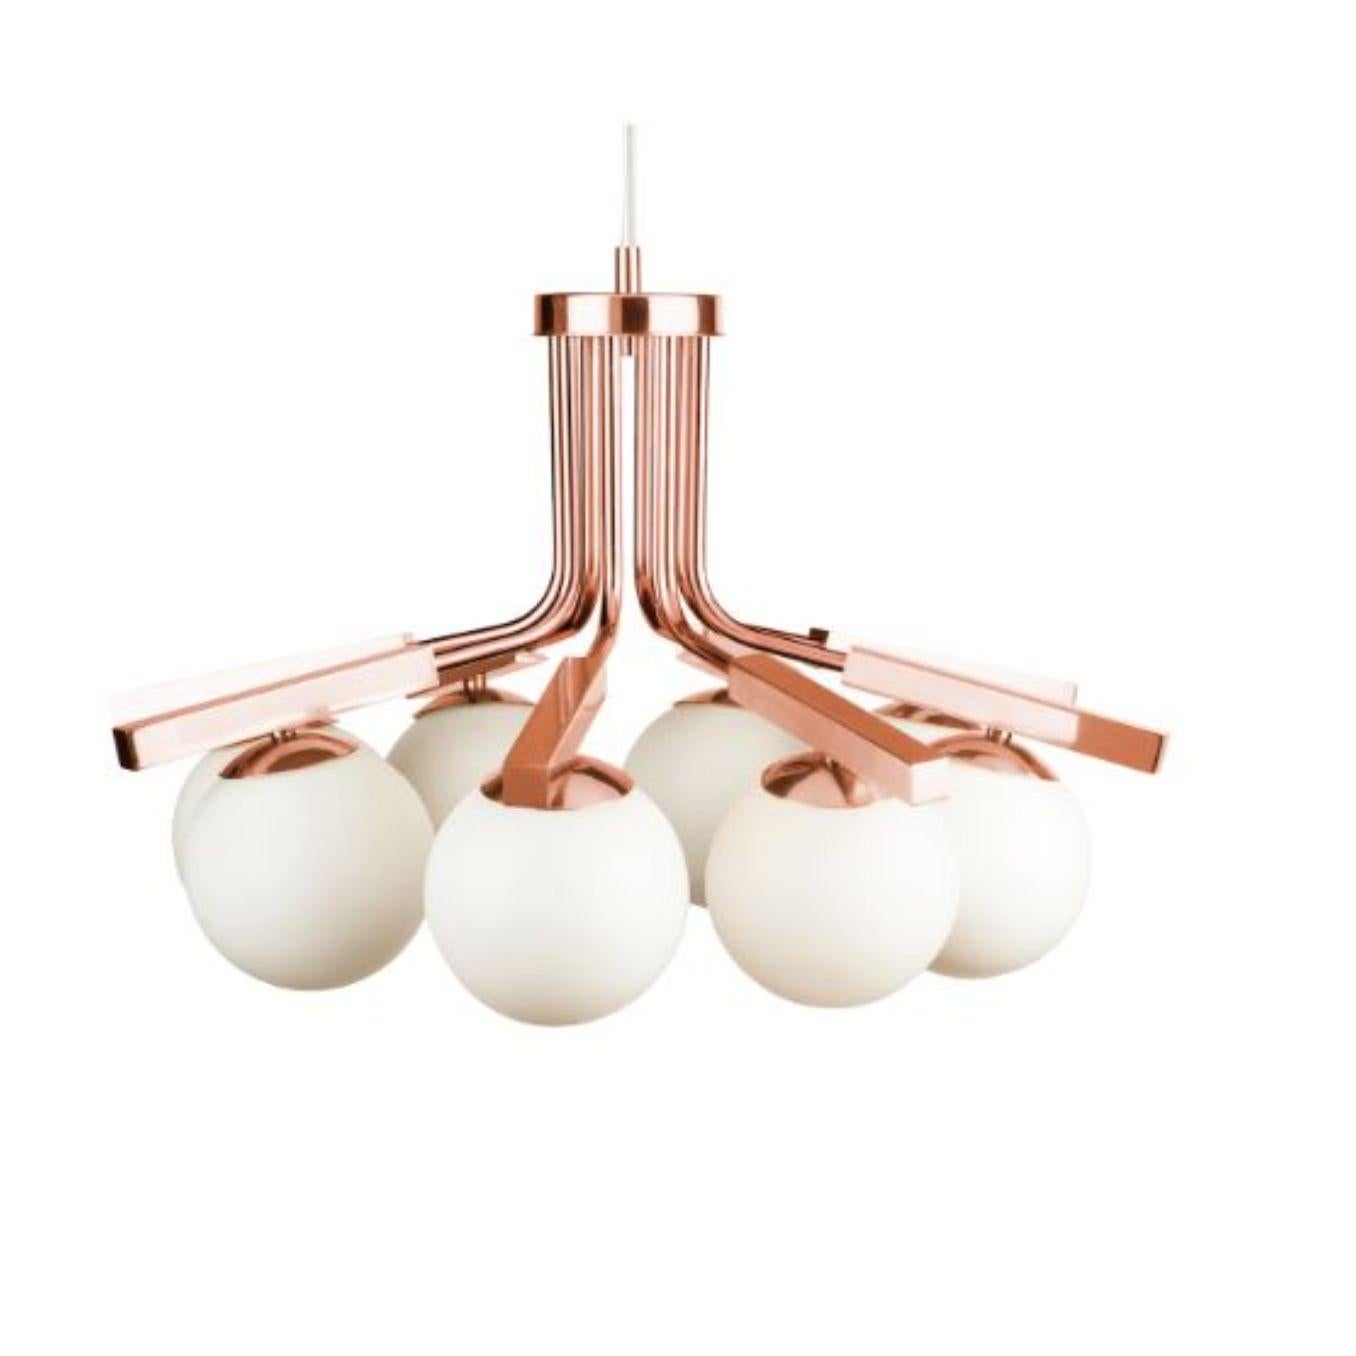 Copper Globe I Suspension lamp by Dooq
Dimensions: W 80 x D 80 x H 45 cm
Materials: lacquered metal, polished or brushed metal, copper.
Also available in different colors and materials. 

Information:
230V/50Hz
8 x max. G9
4W